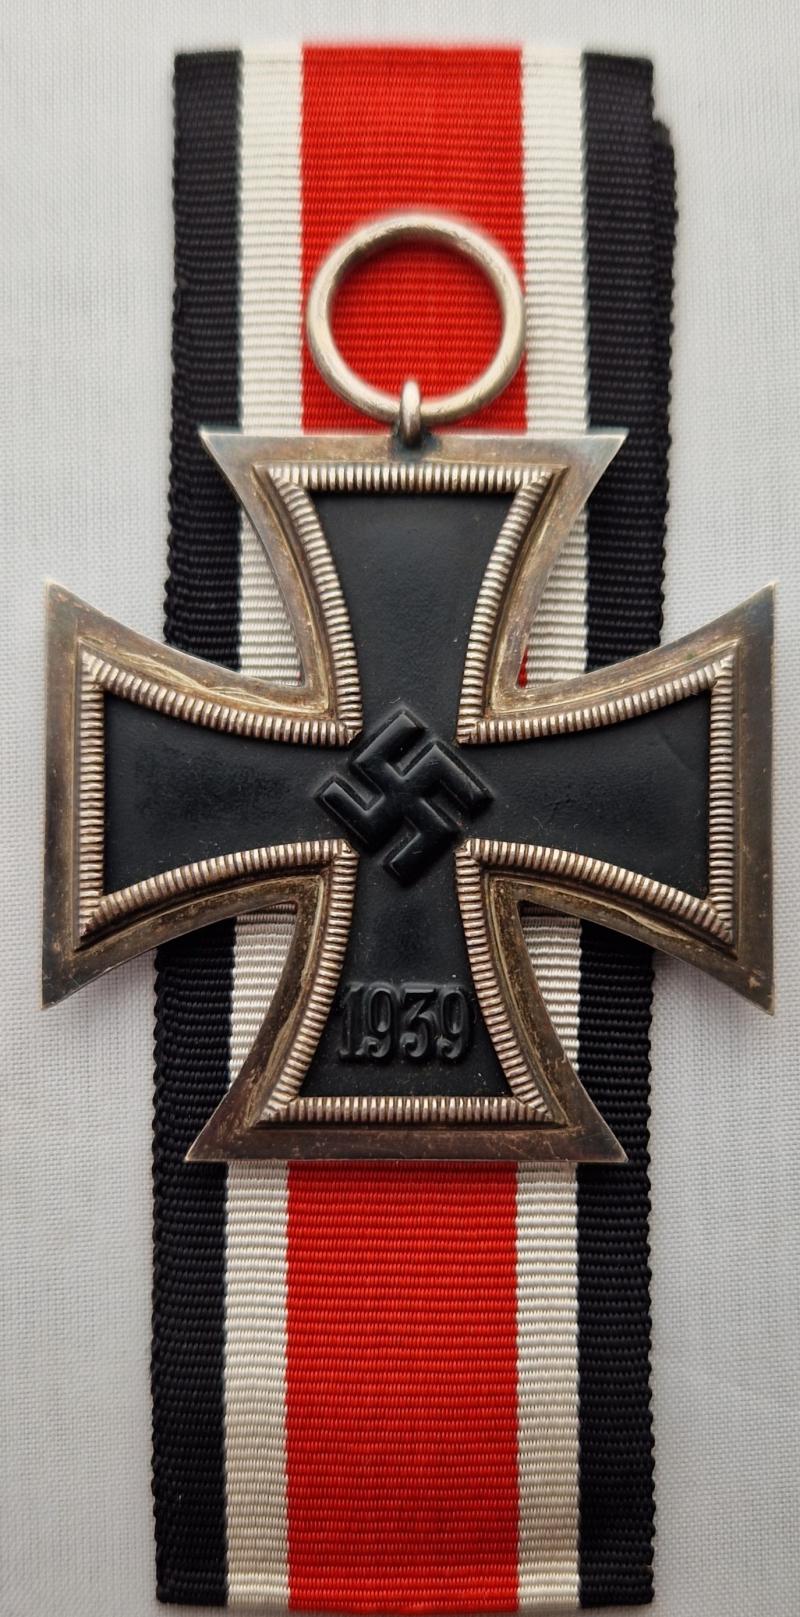 Early 1939 Ubergrosse or Knights Cross size Iron Cross Second Class by Frank & Reif.